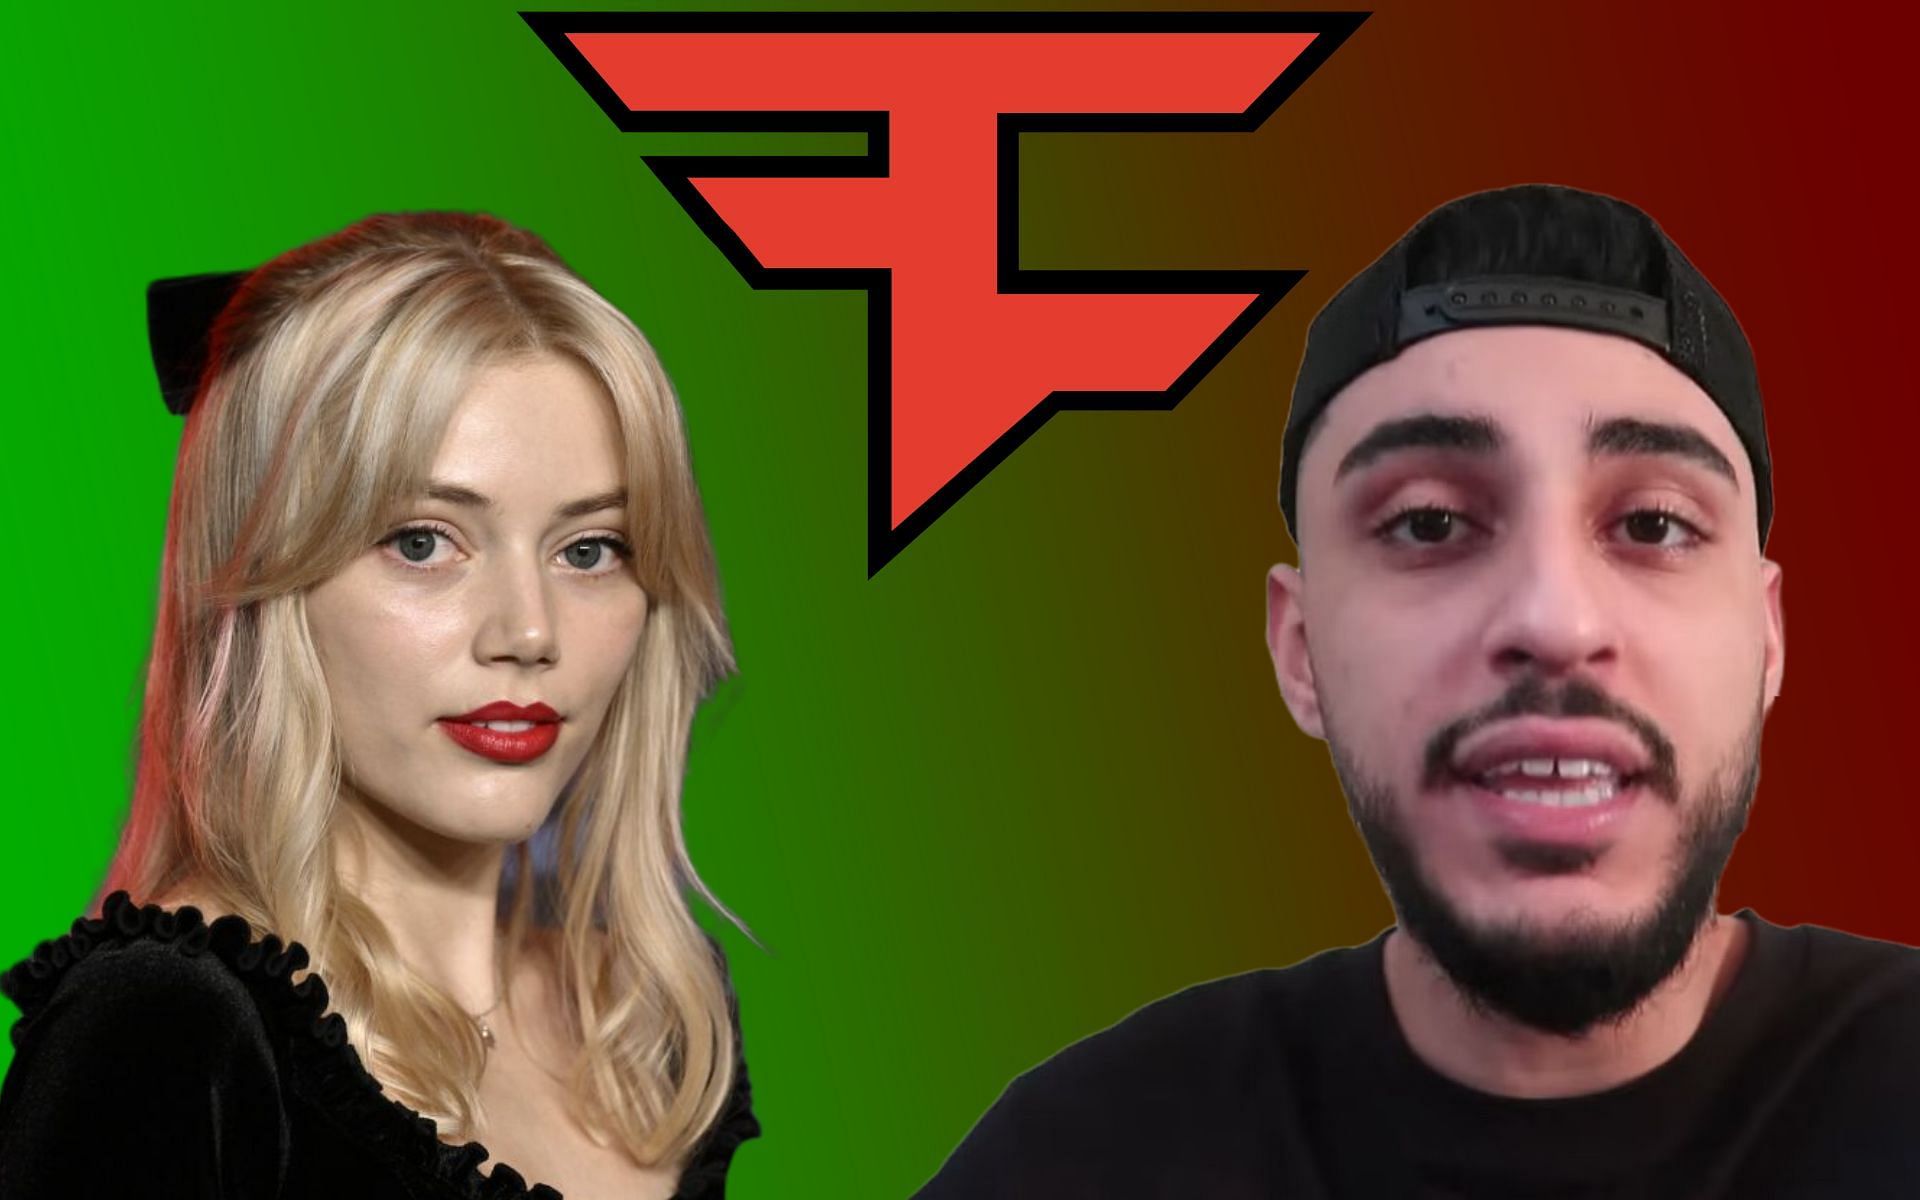 "This is entirely a political move" - FaZe Rain leaks Stranger Things